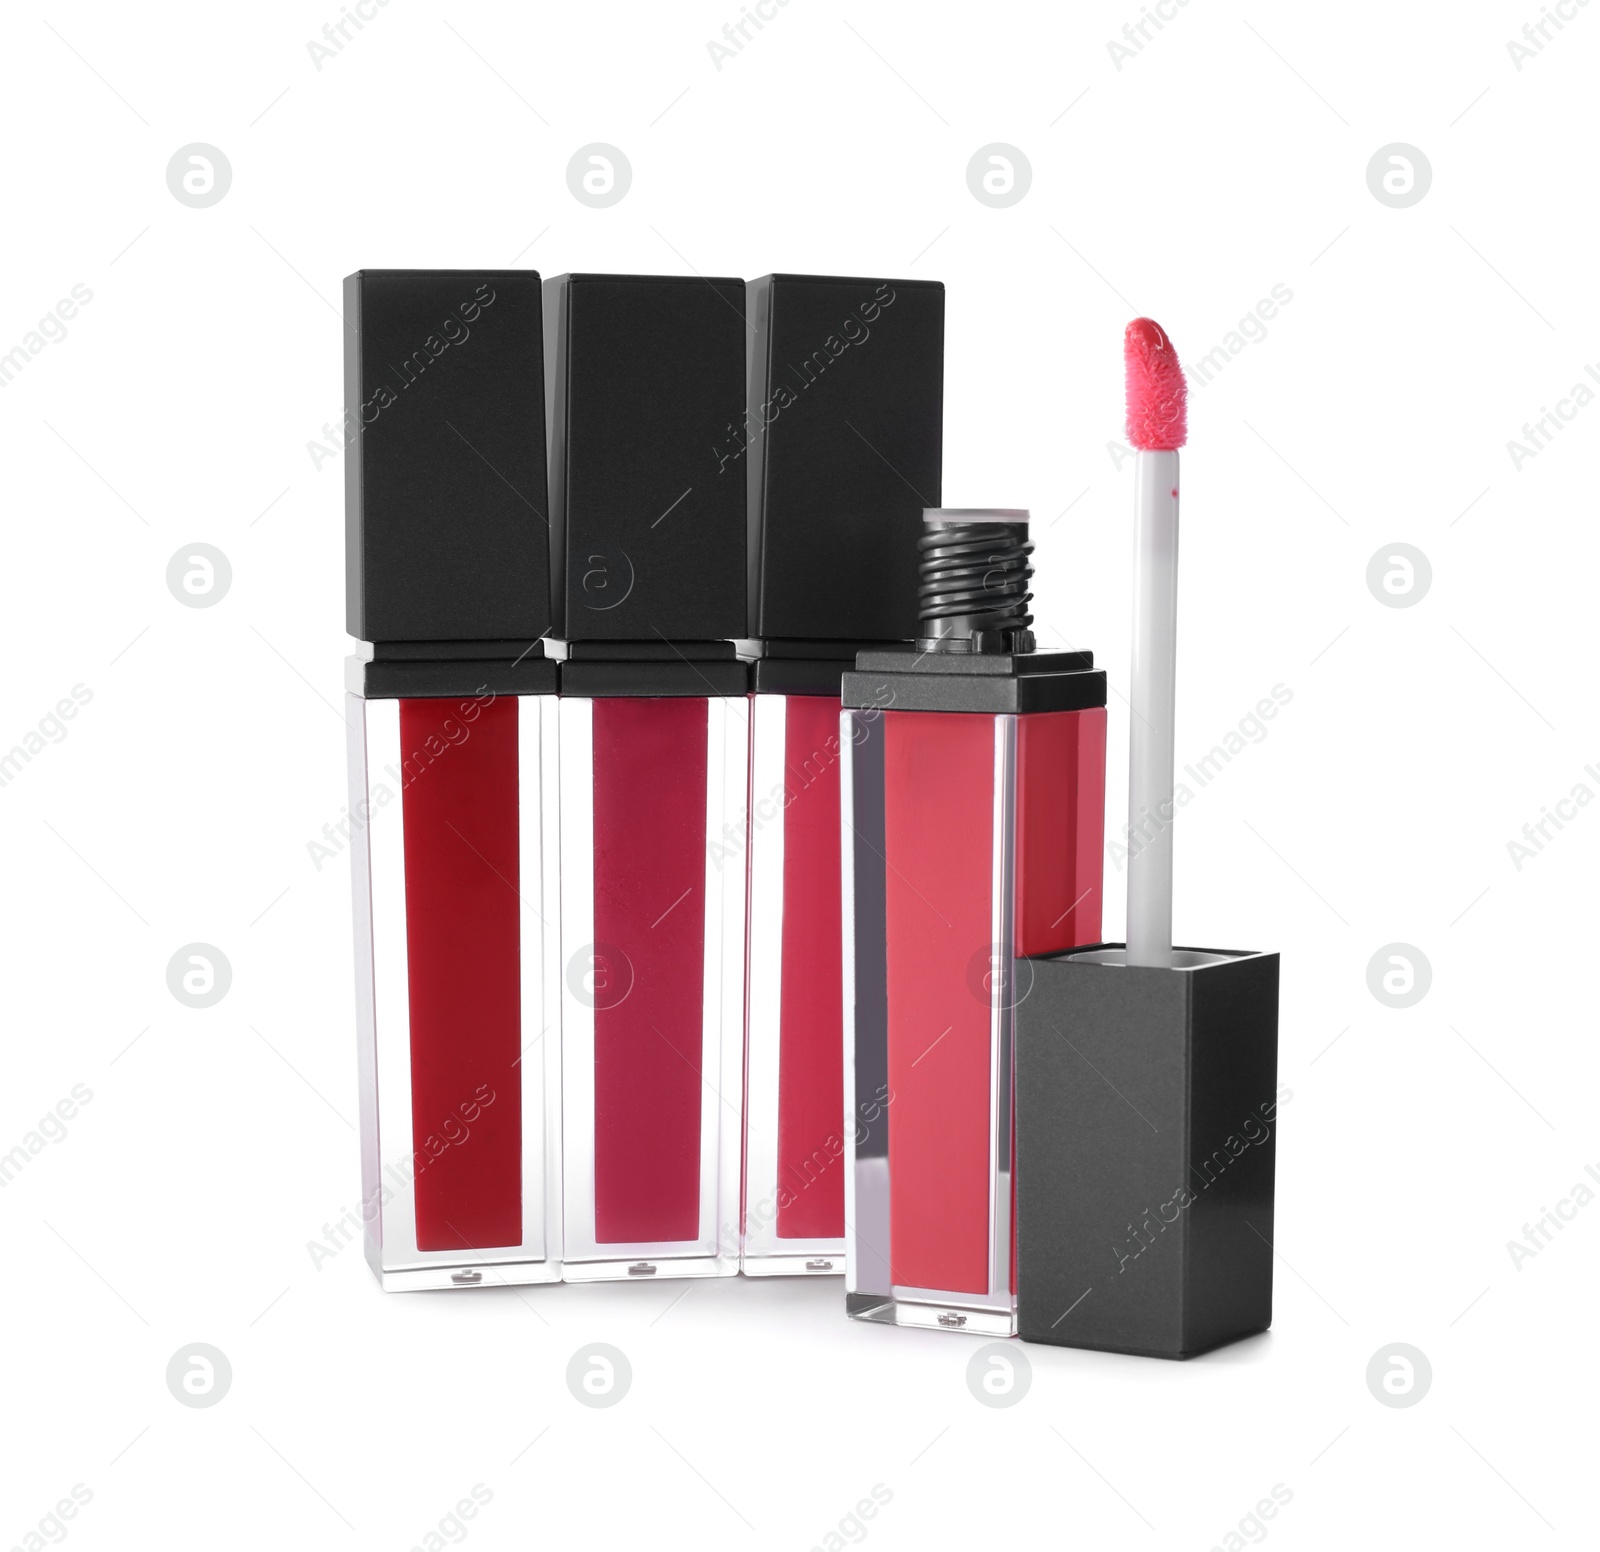 Photo of Different liquid lipsticks on white background. Makeup product